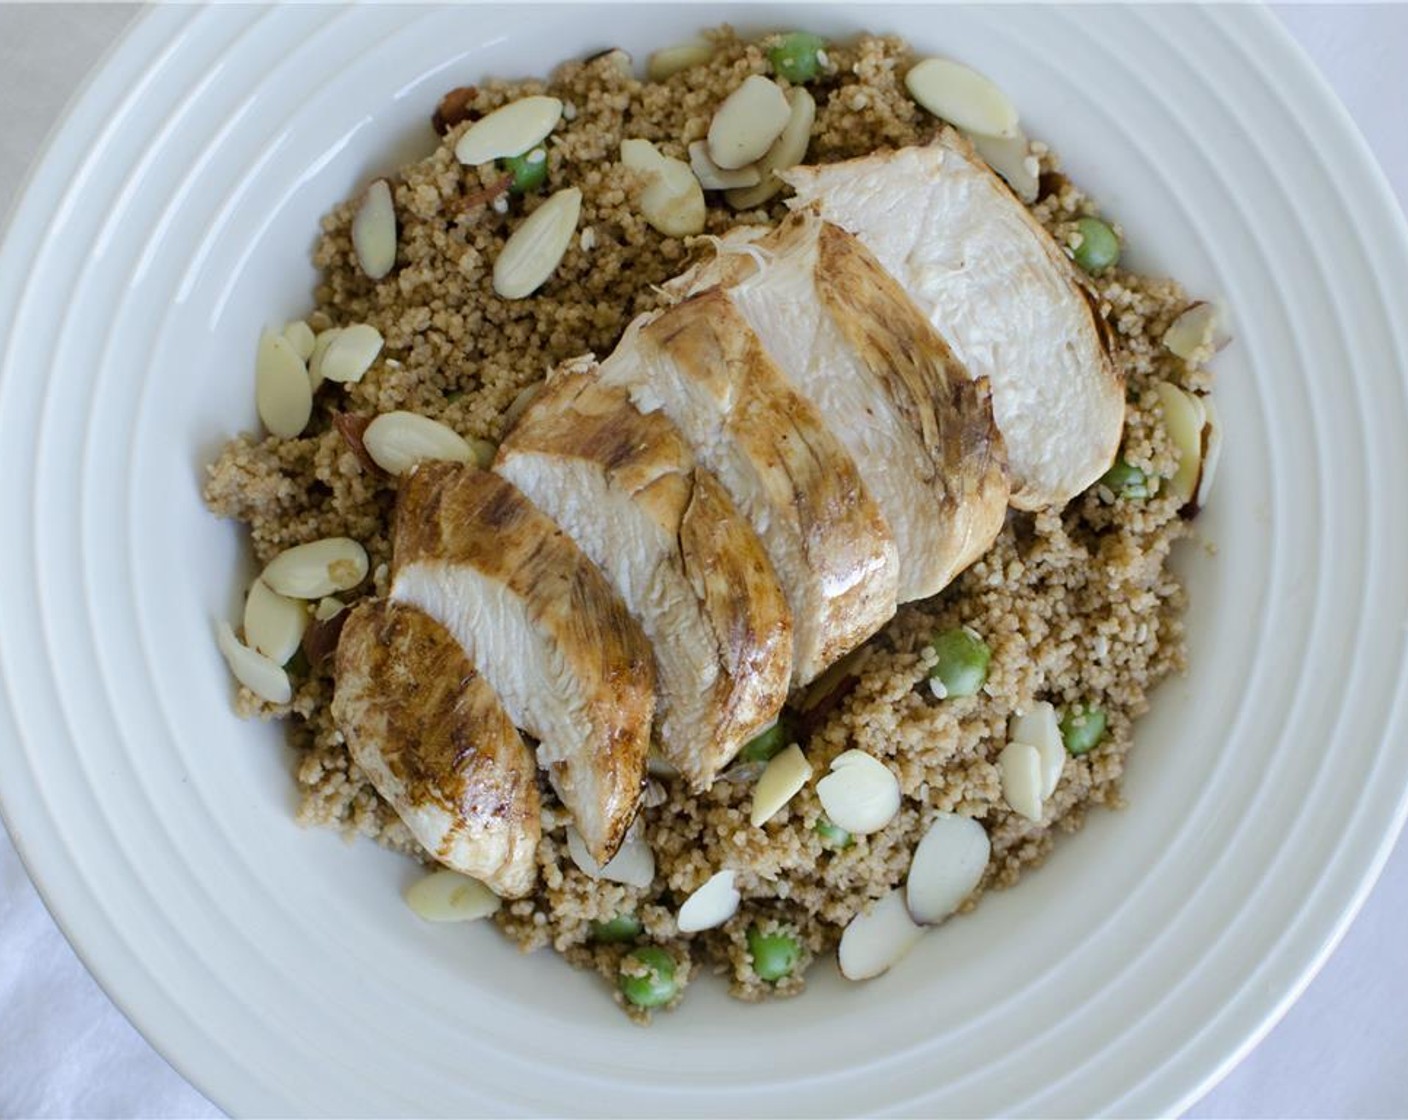 Soy-Glazed Chicken with Asparagus & Pea Couscous